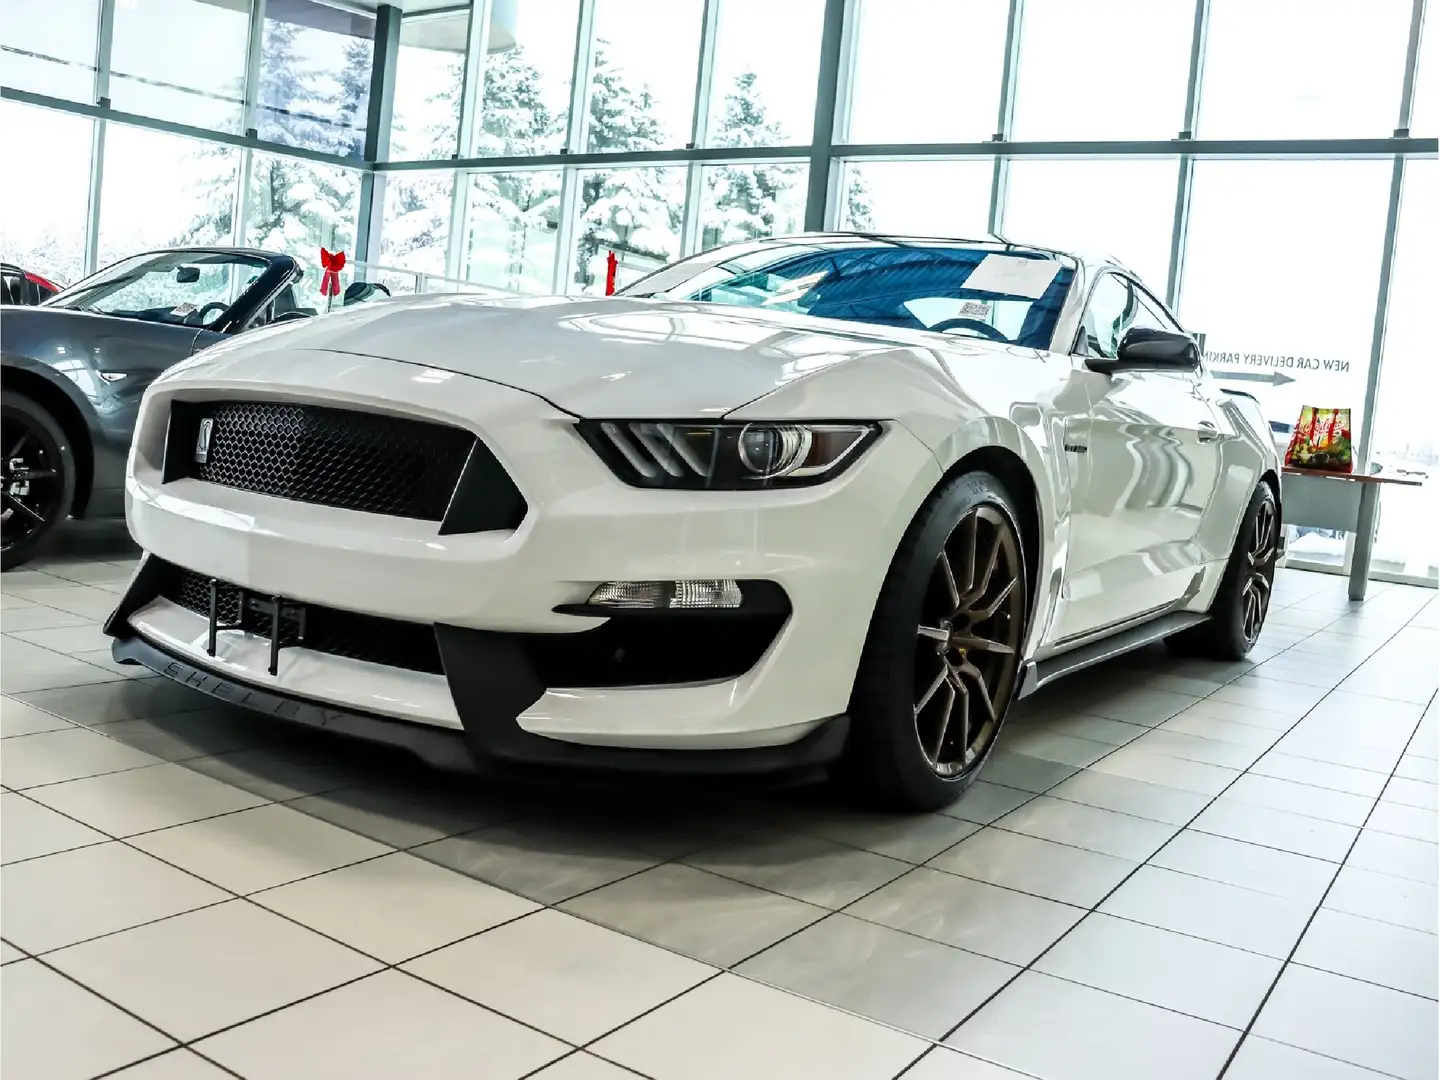 Ford Mustang SHELBY GT350 V8 5.2L GT 350 2016 - 1